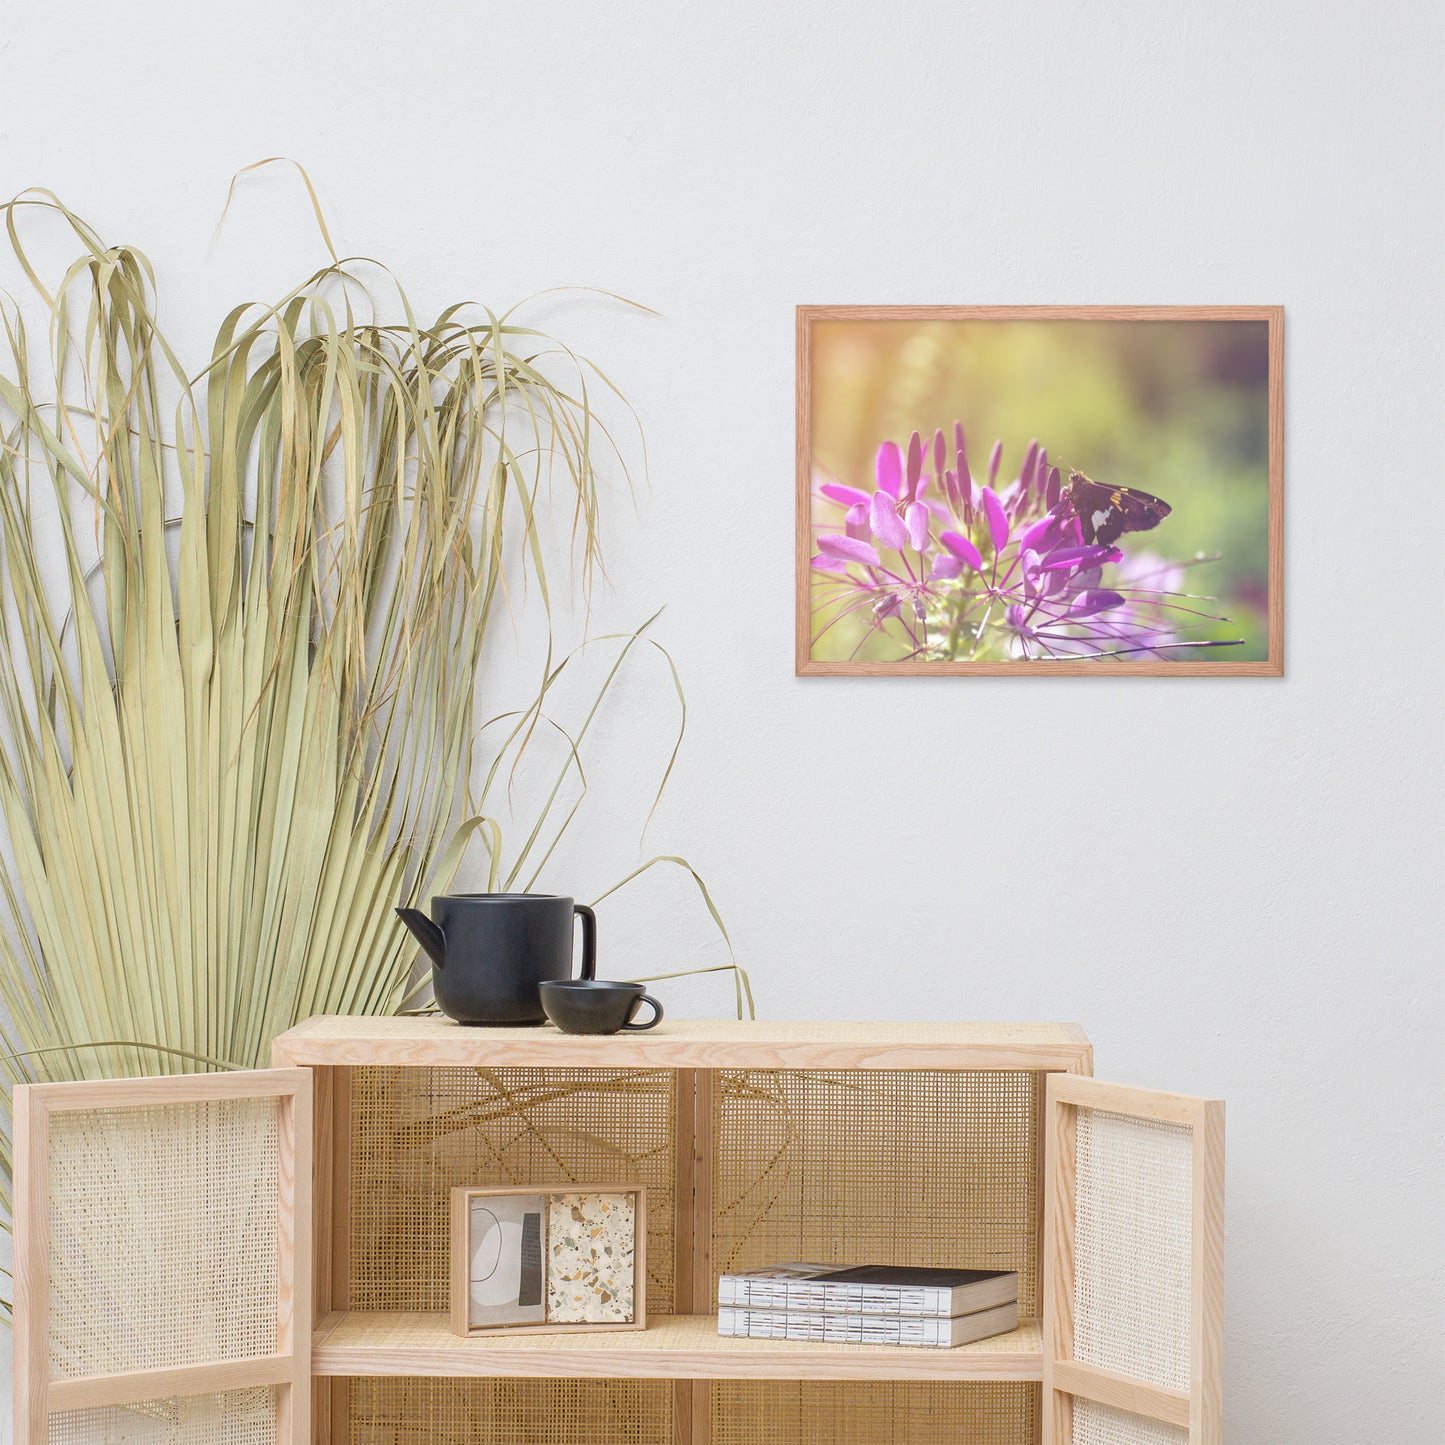 Spider Flower in Glory Light With Spotted Moth Floral Nature Photo Framed Wall Art Print